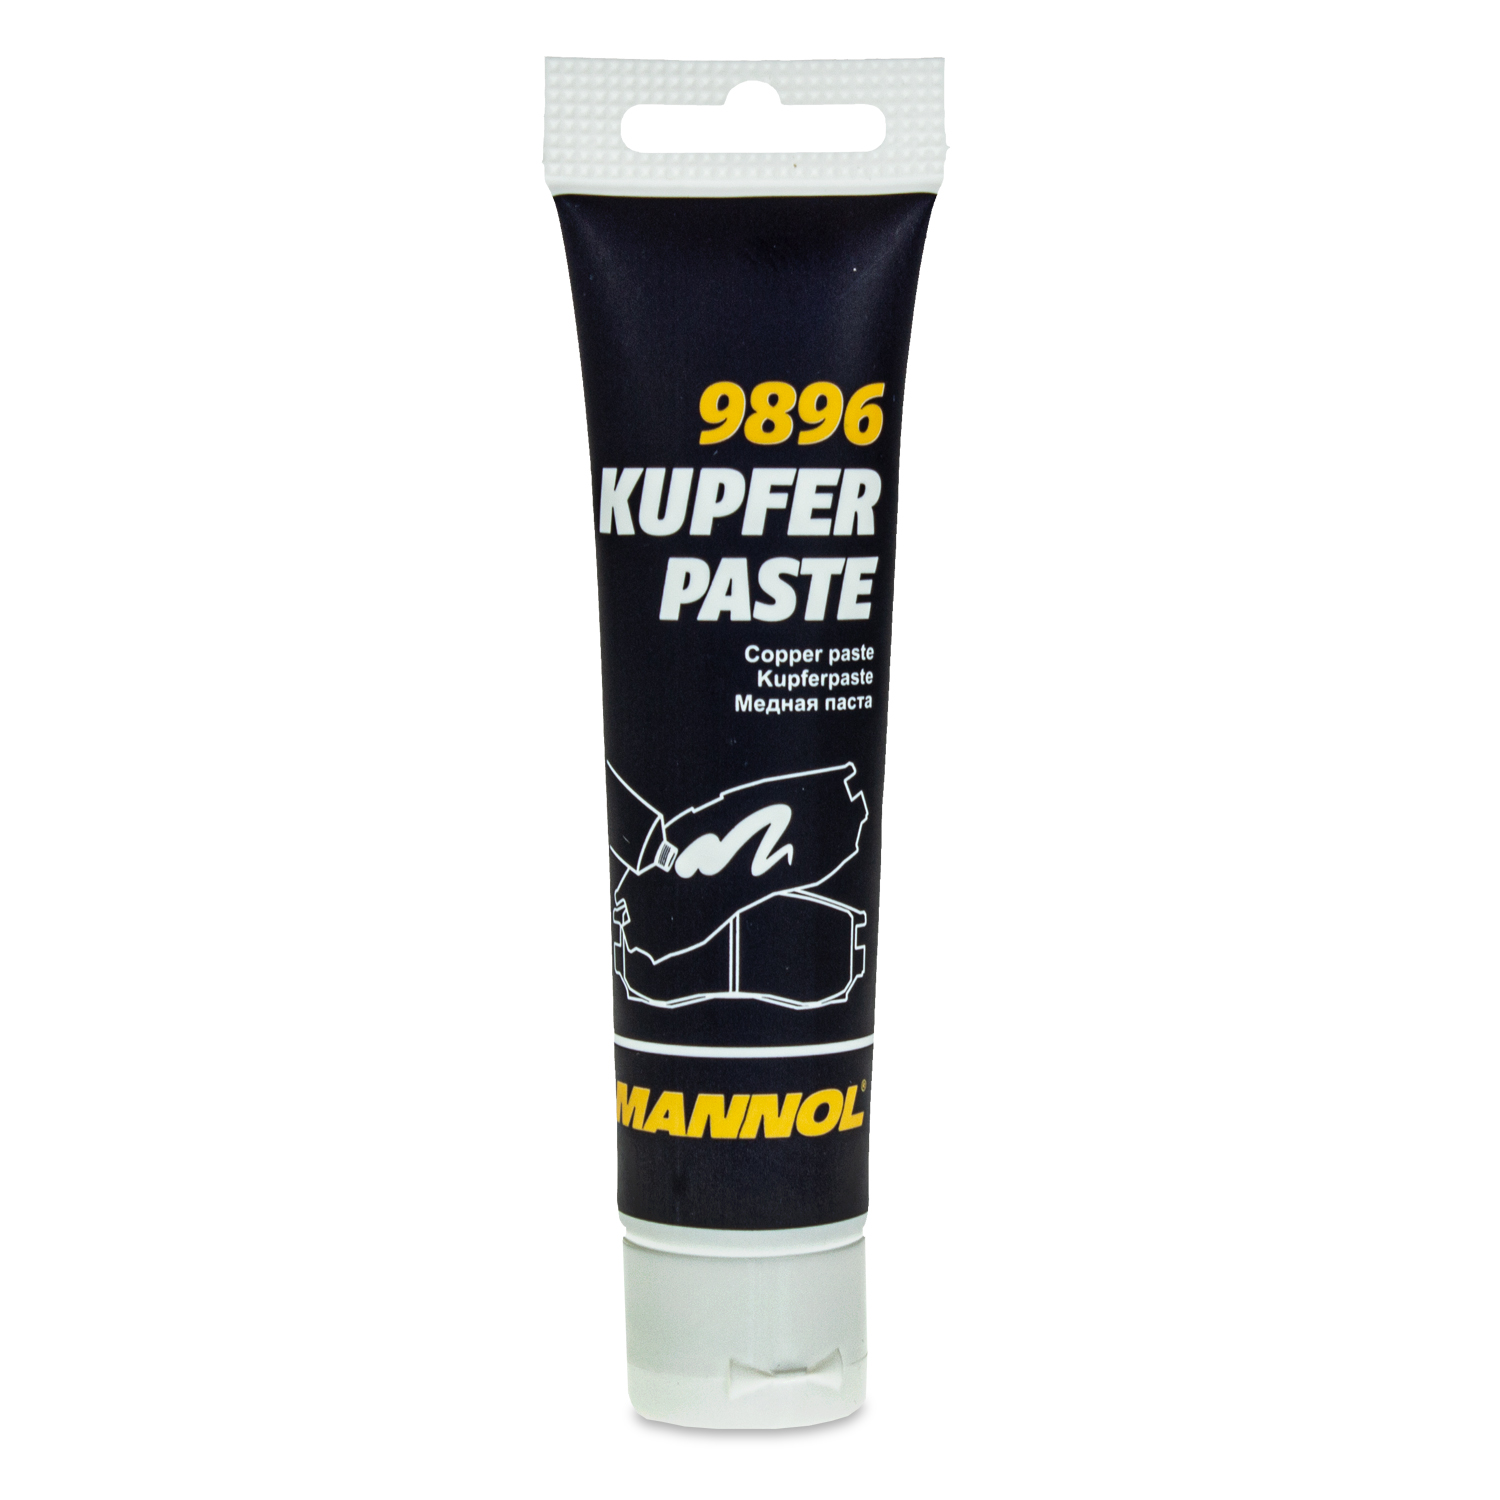 MANNOL 9896 Copper Paste, Copper Grease, Greases, Pastes